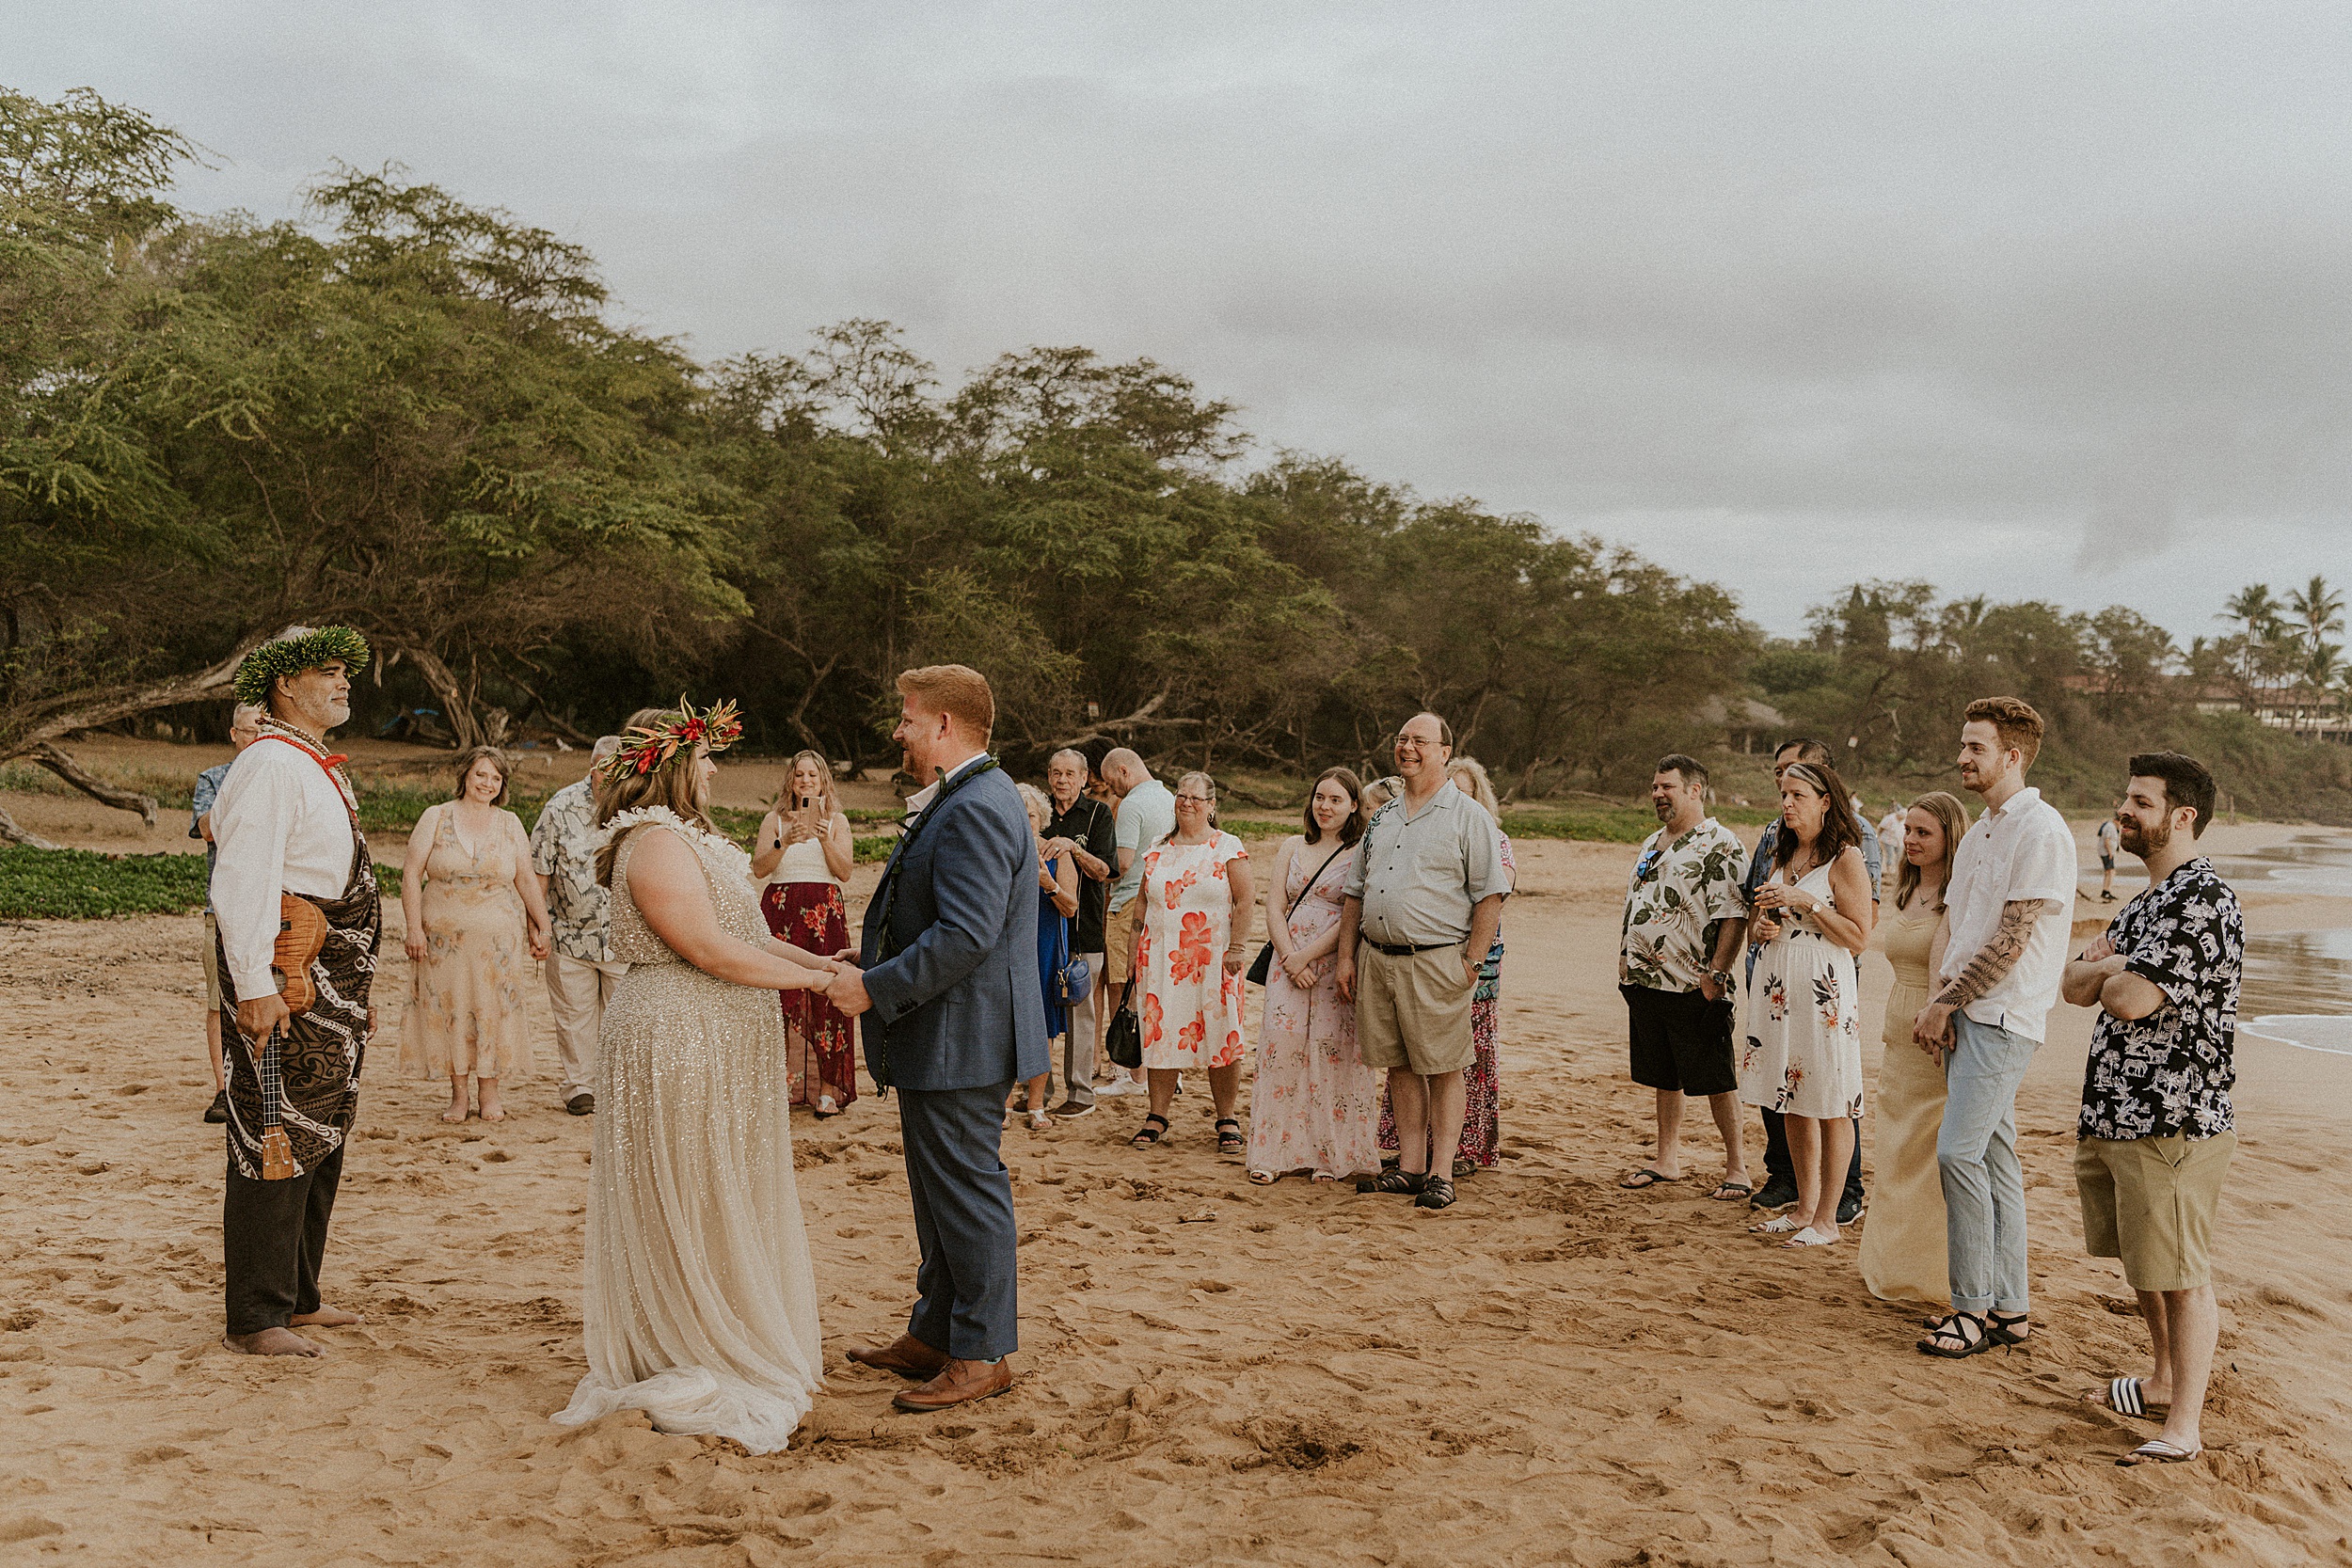 couple getting married on beach in hawaii